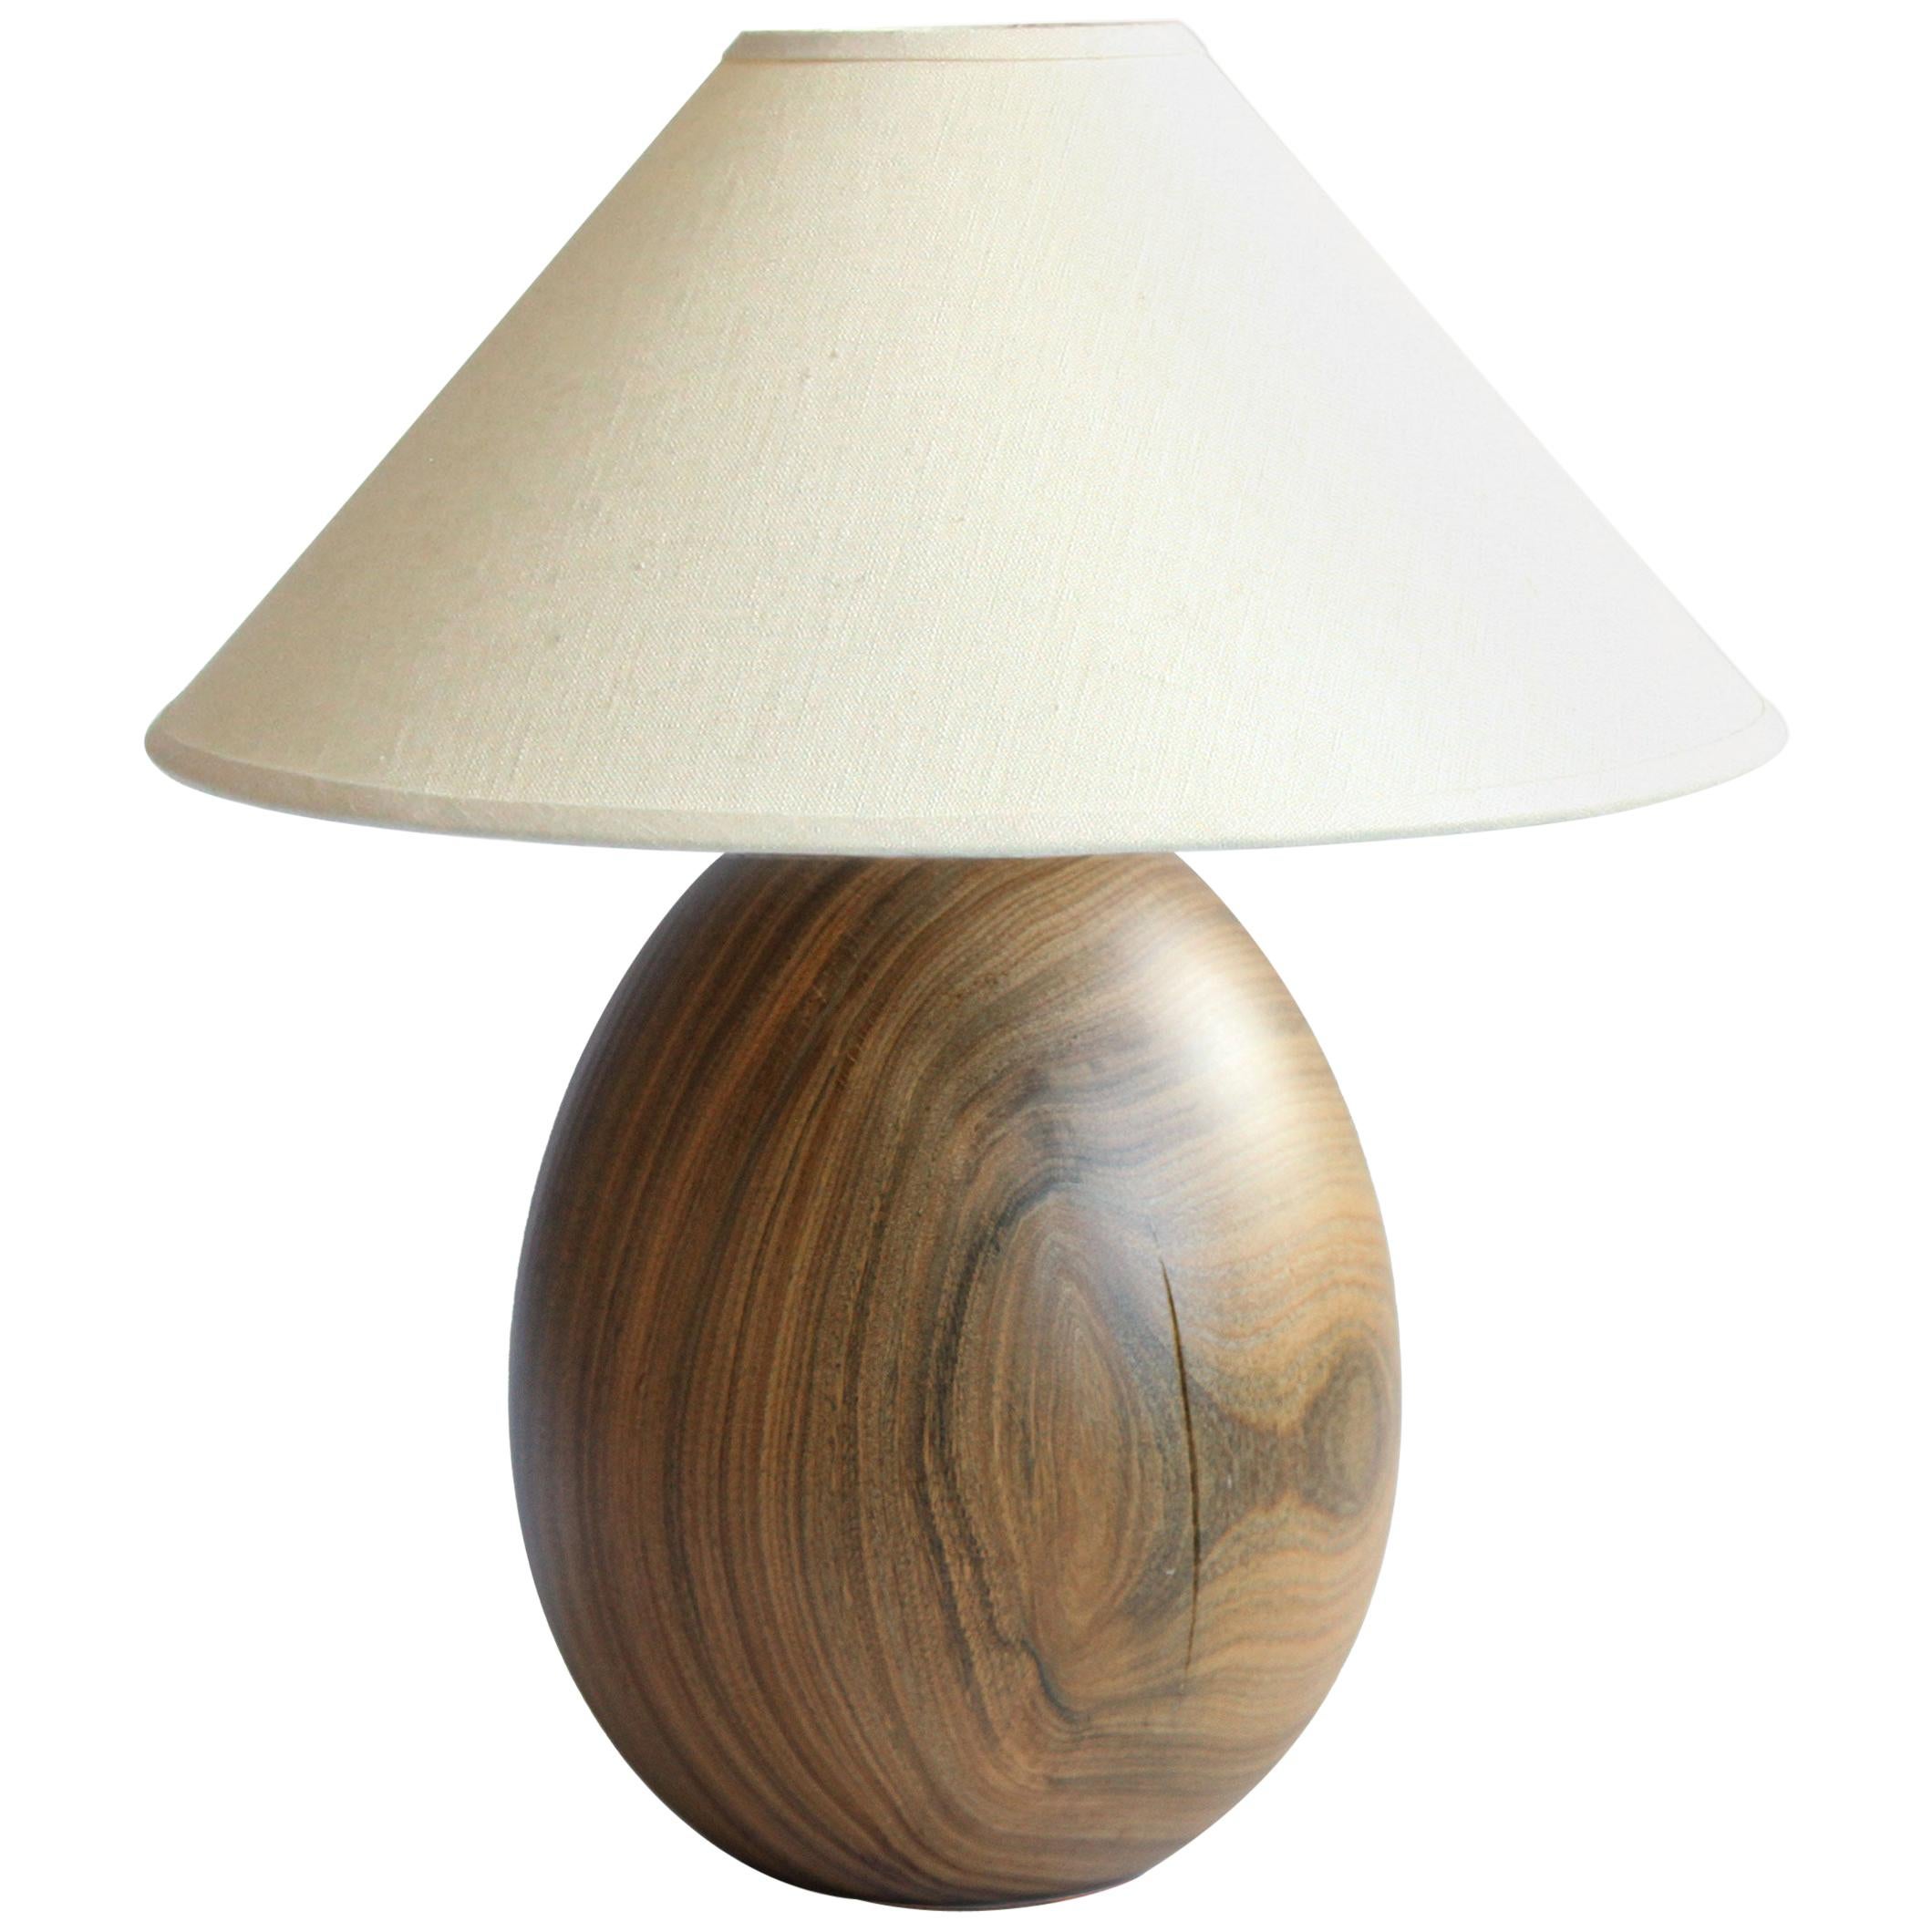 Tropical Hardwood Lamp with White Linen Shade Small Medium, Árbol Collection, 22